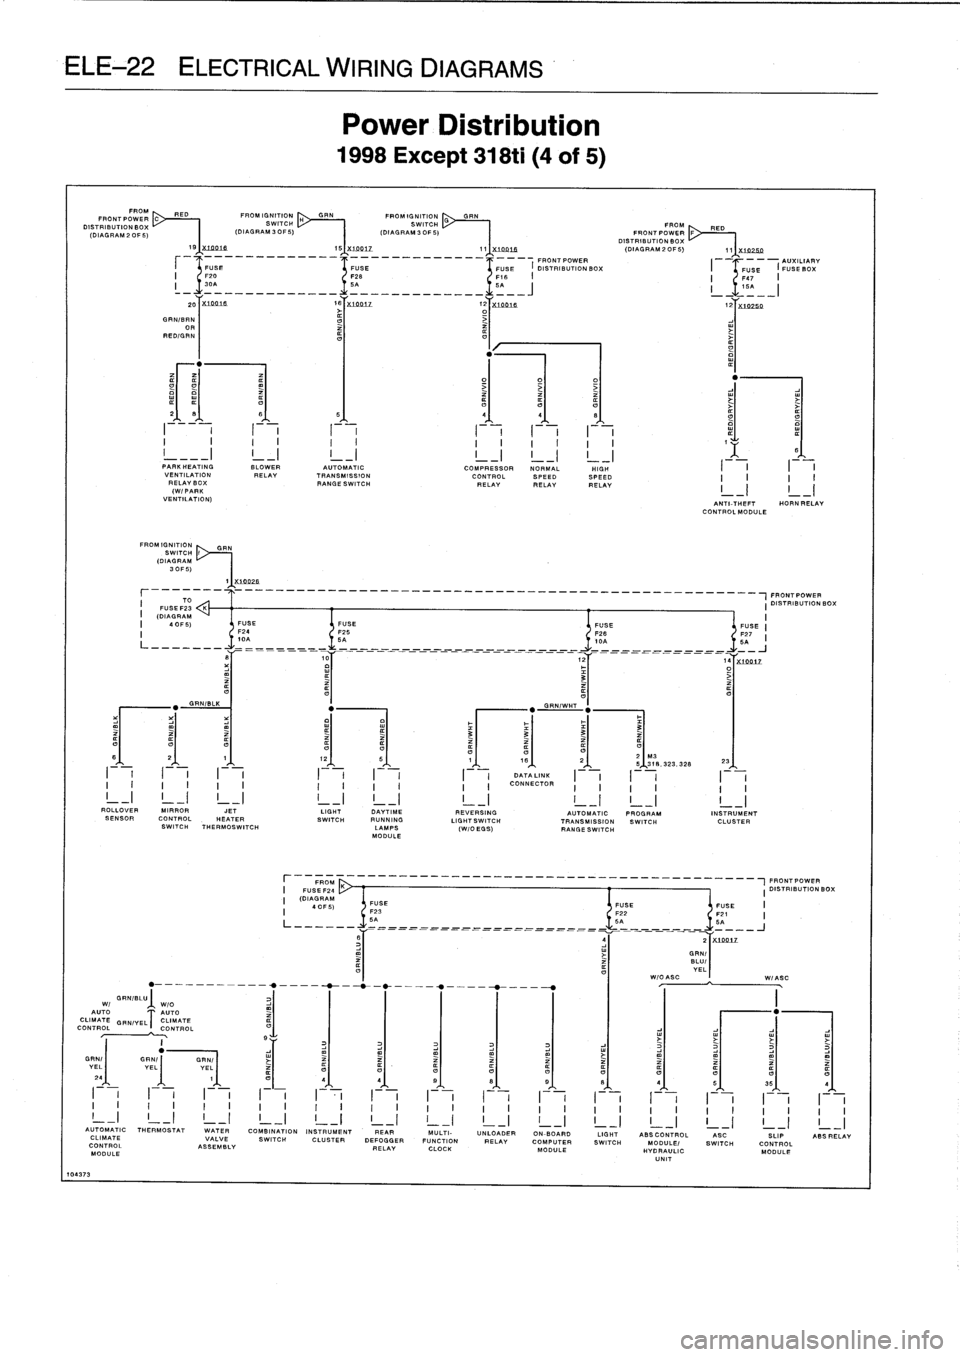 BMW M3 1993 E36 Service Manual 
ELE-22

ELECTRICAL
WIRING
DIAGRAMS

GRNIBLU
Wl

WIO

AUTO

AUTO

CLIMATE

GEN/YELT
CLIMATE

CONTROL

CONTROL

10437
3

FP

OM~
	

PED
FRONTPOWER
DISTRIBUTION

BOY%

(DIAGRAM

2
OF
5)

S

FROMIGNITION